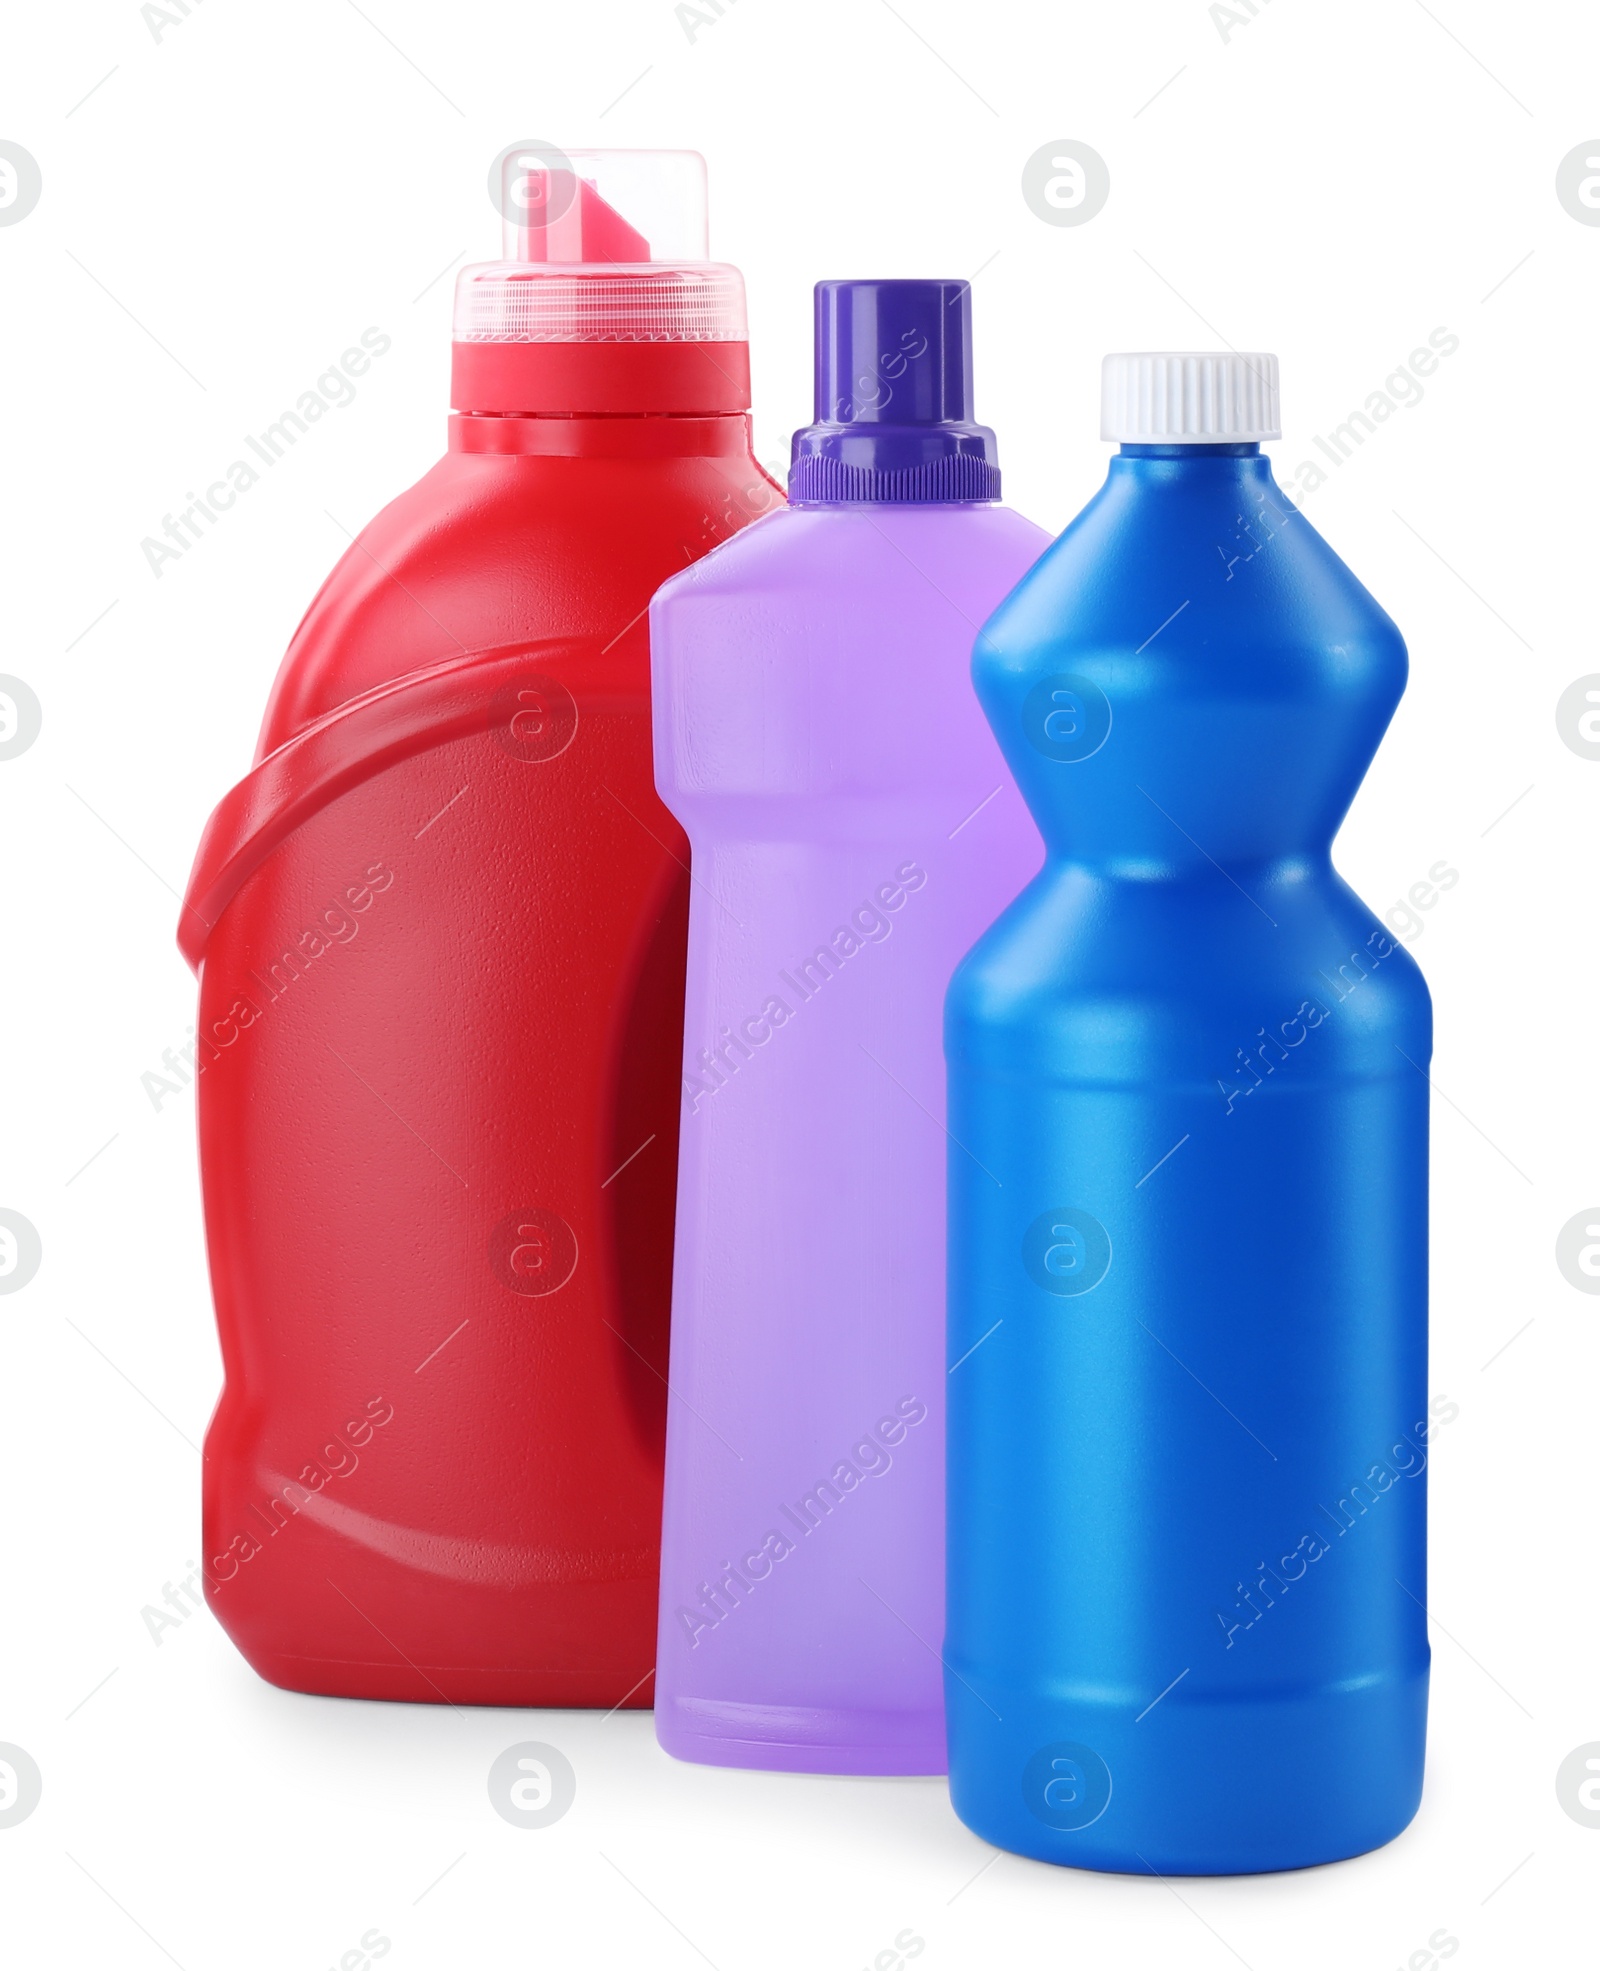 Photo of Bottles of different cleaning products isolated on white